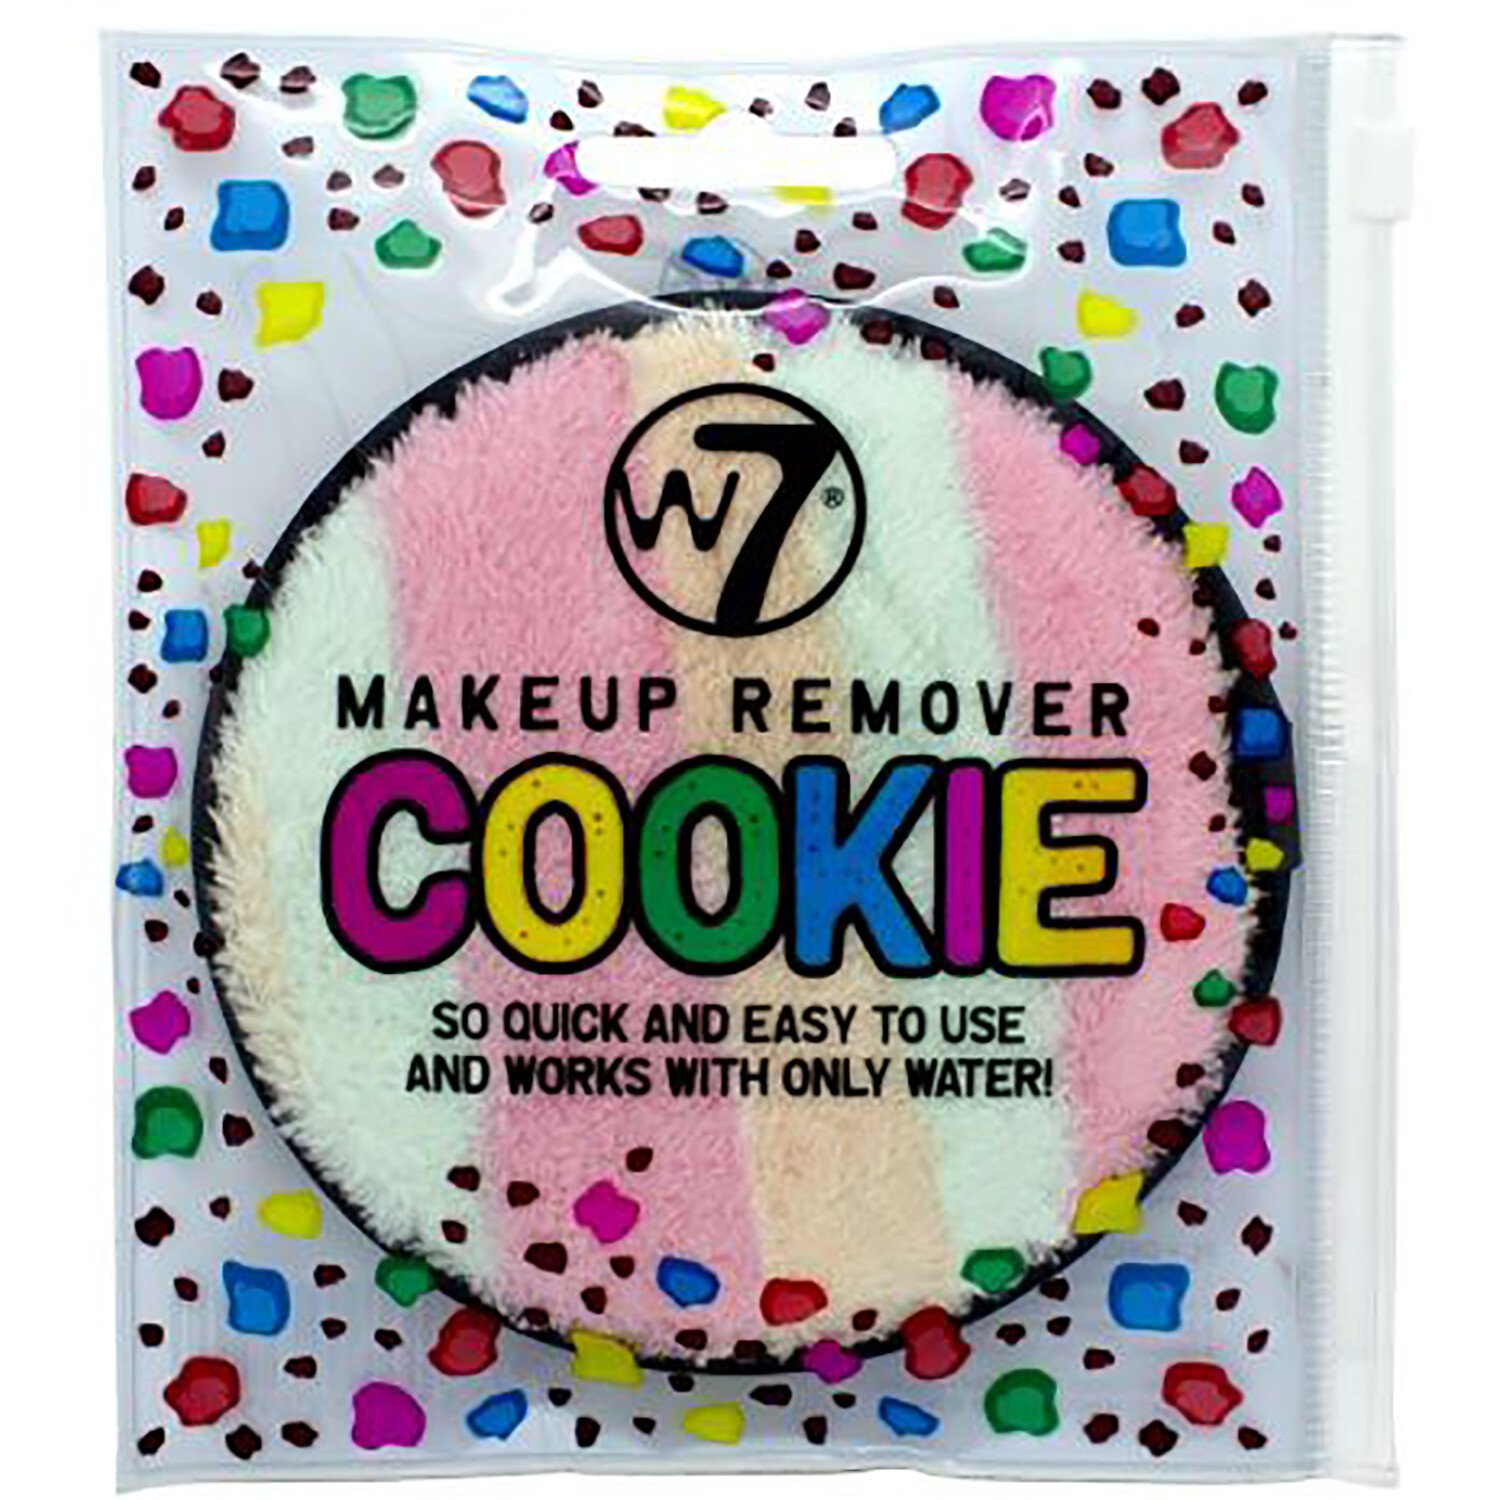 Makeup Remover Cookie Image